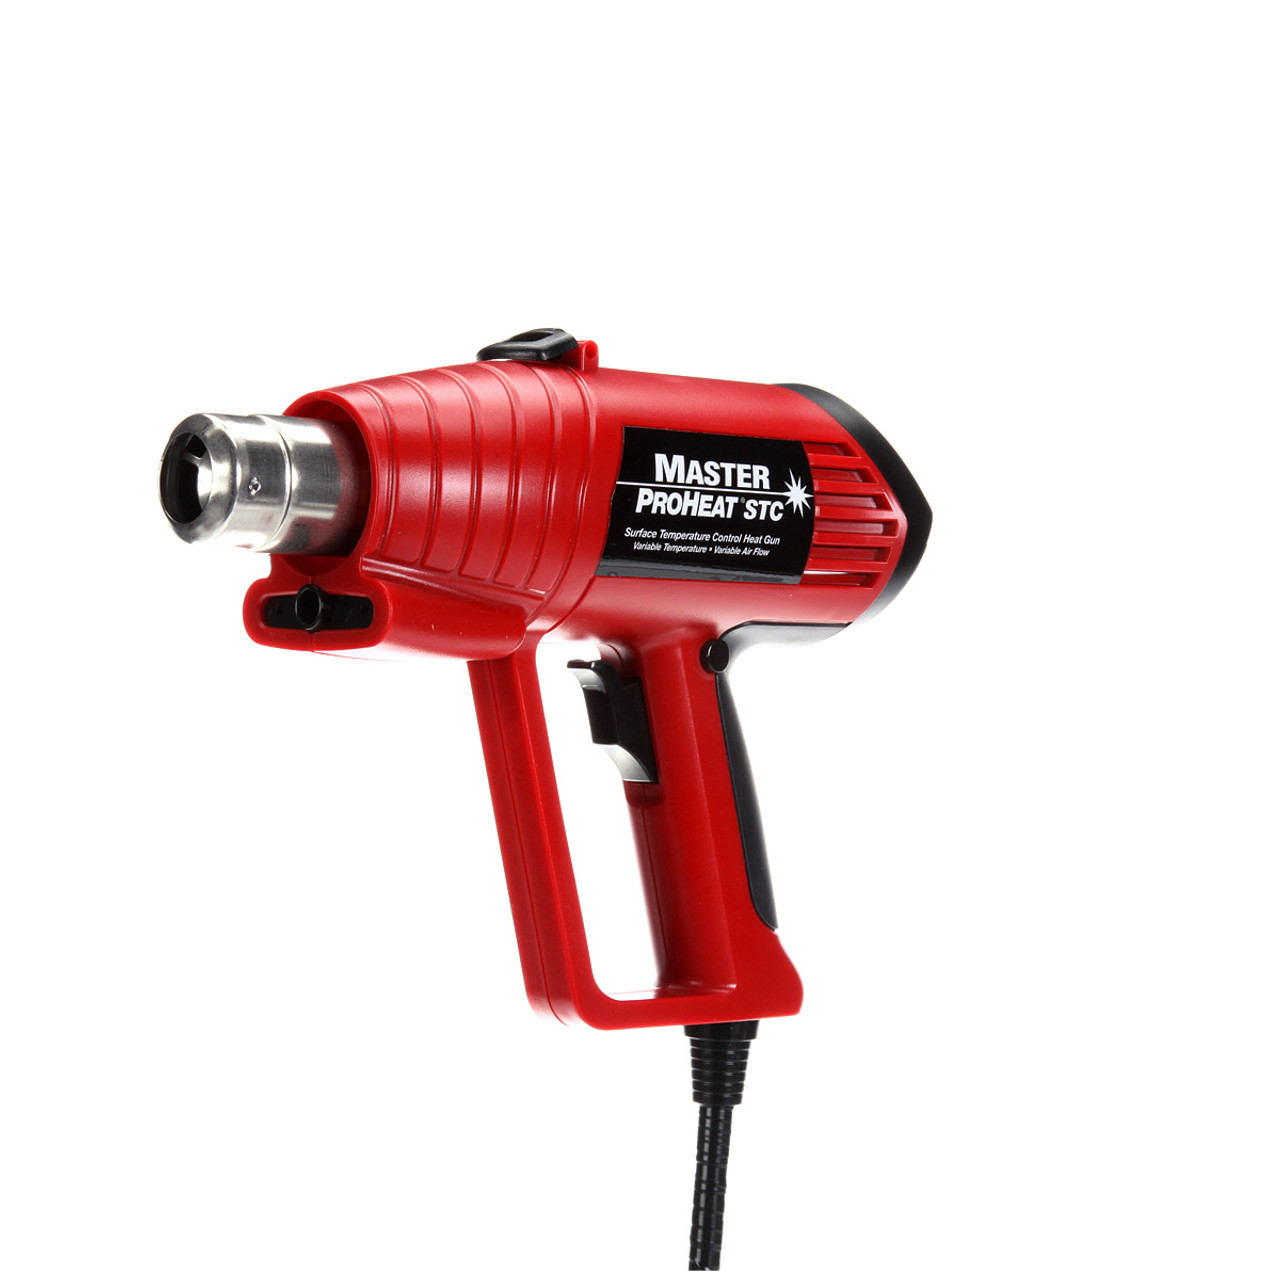 600 Gms Heat Shrink Gun Thermo Tools 2000W, 2000 Watts at Rs 1545